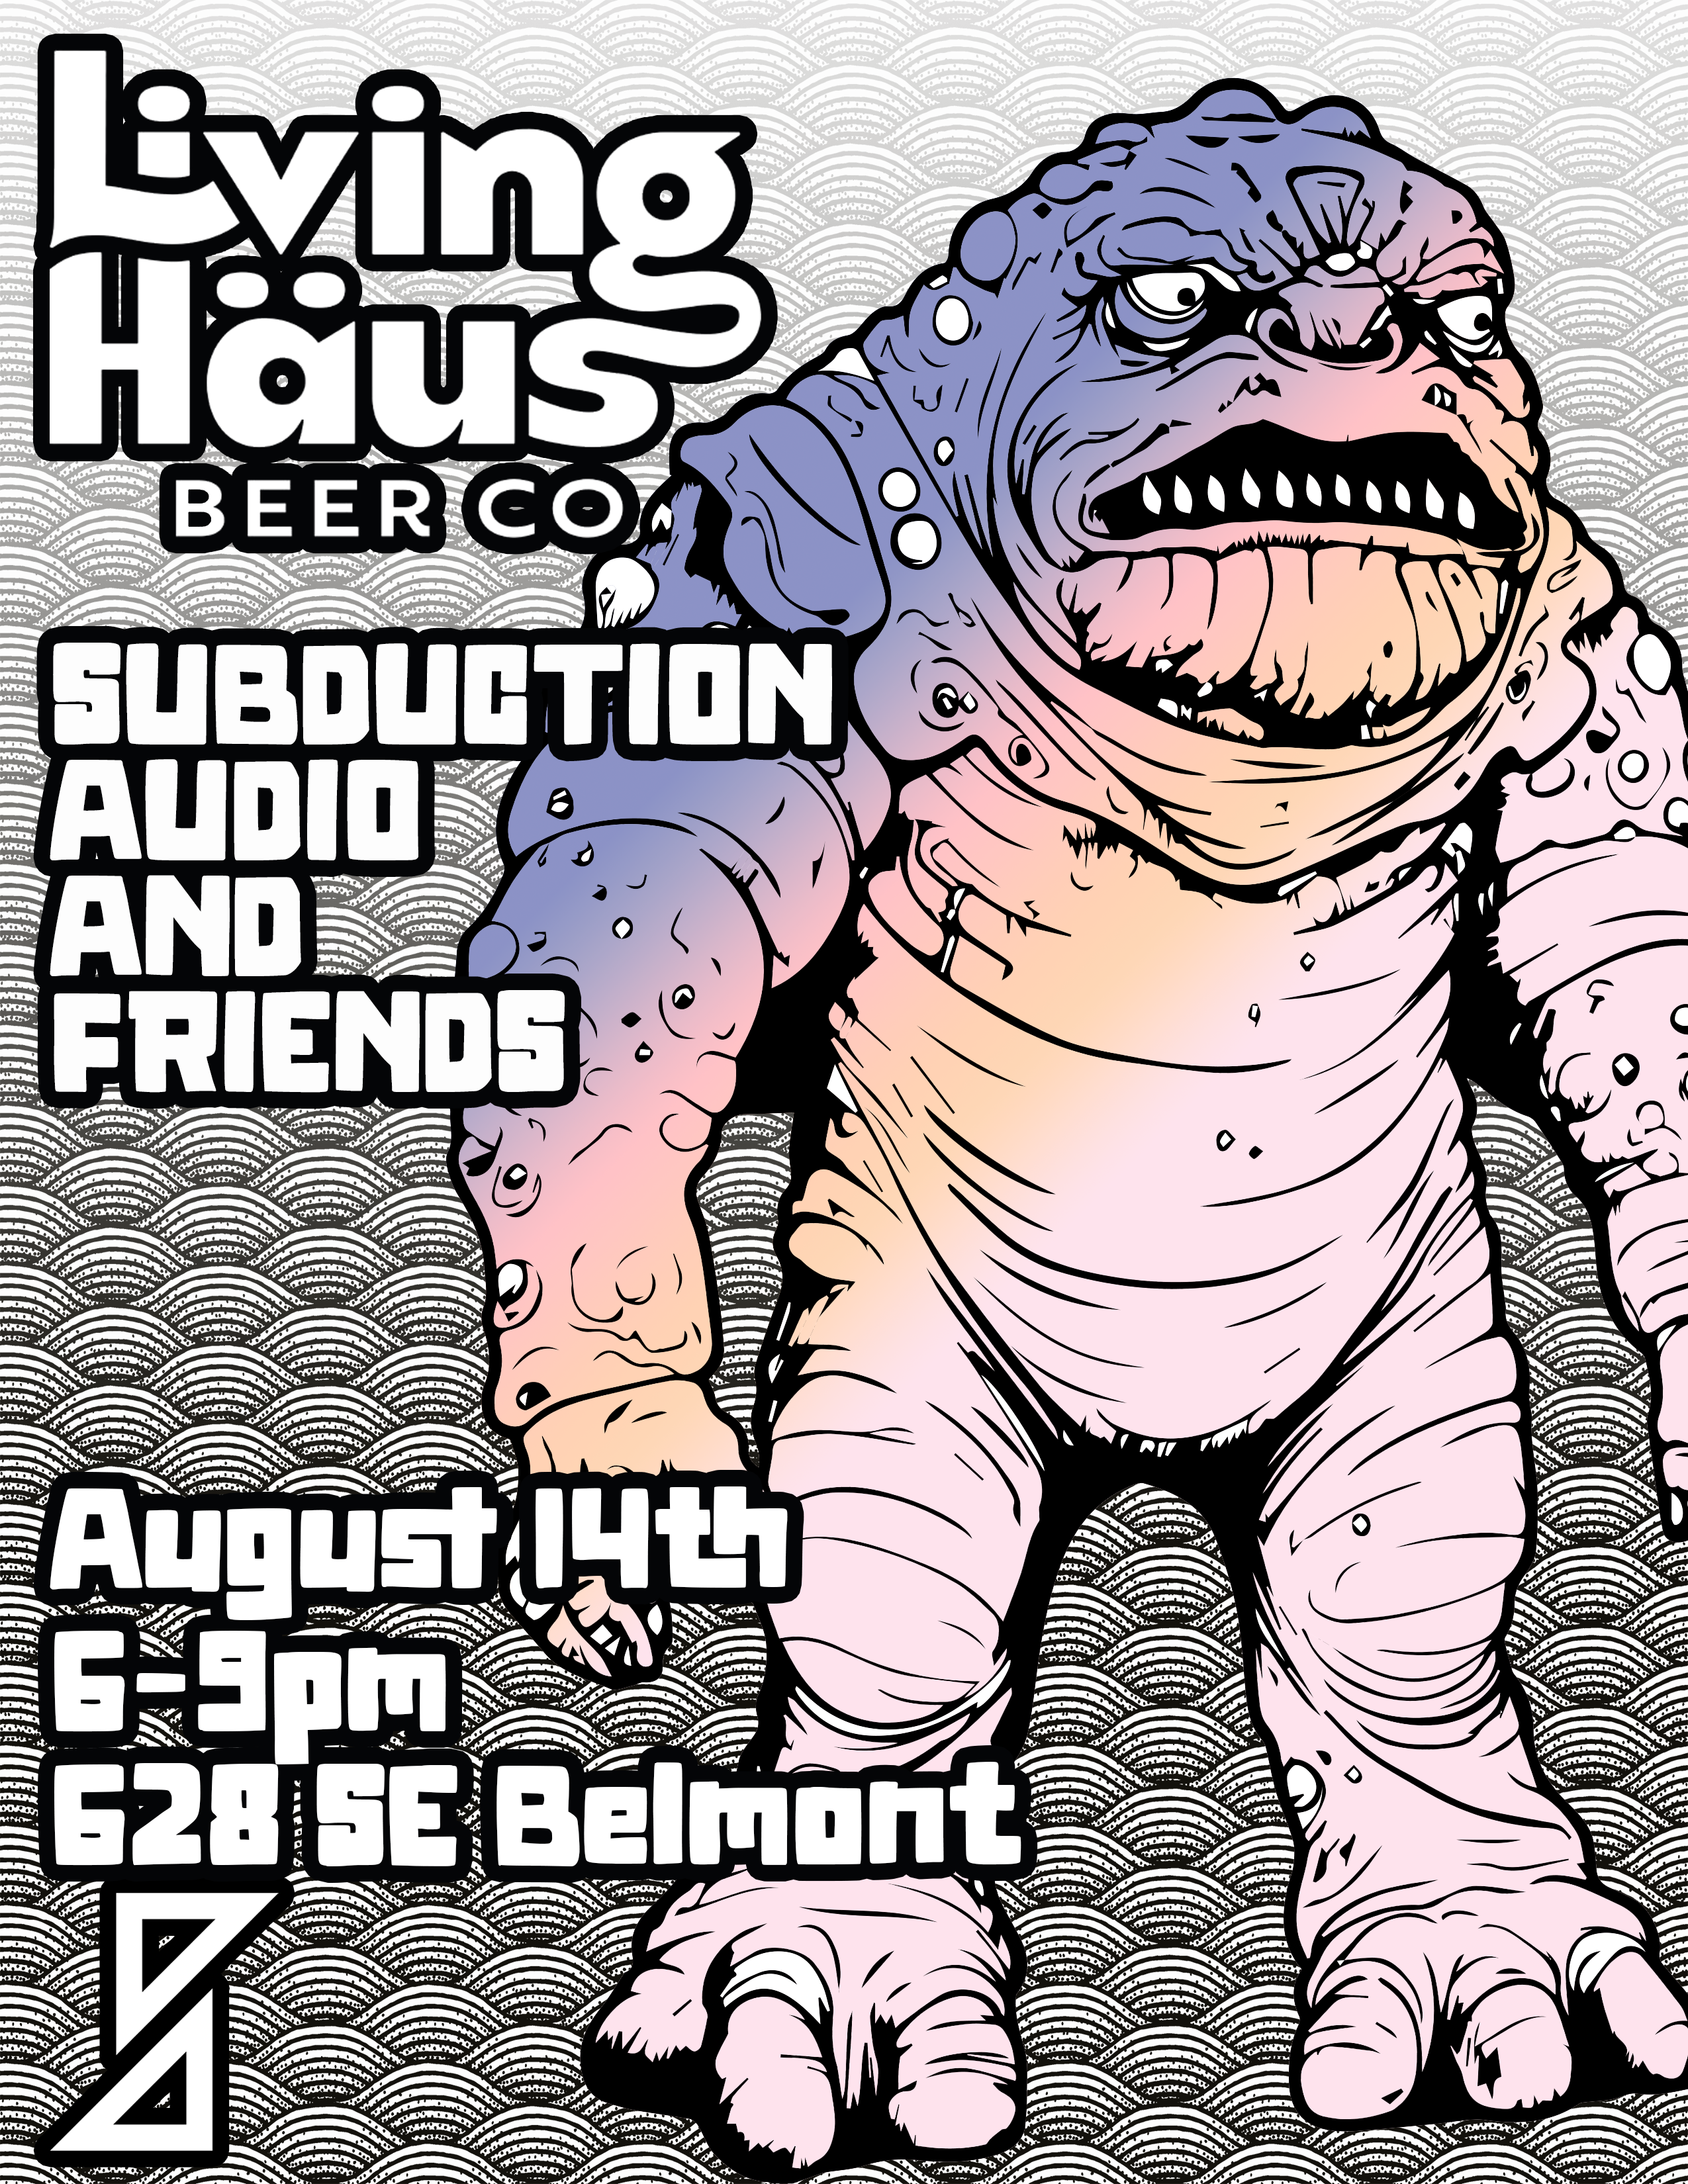 Subduction Audio and Friends 12